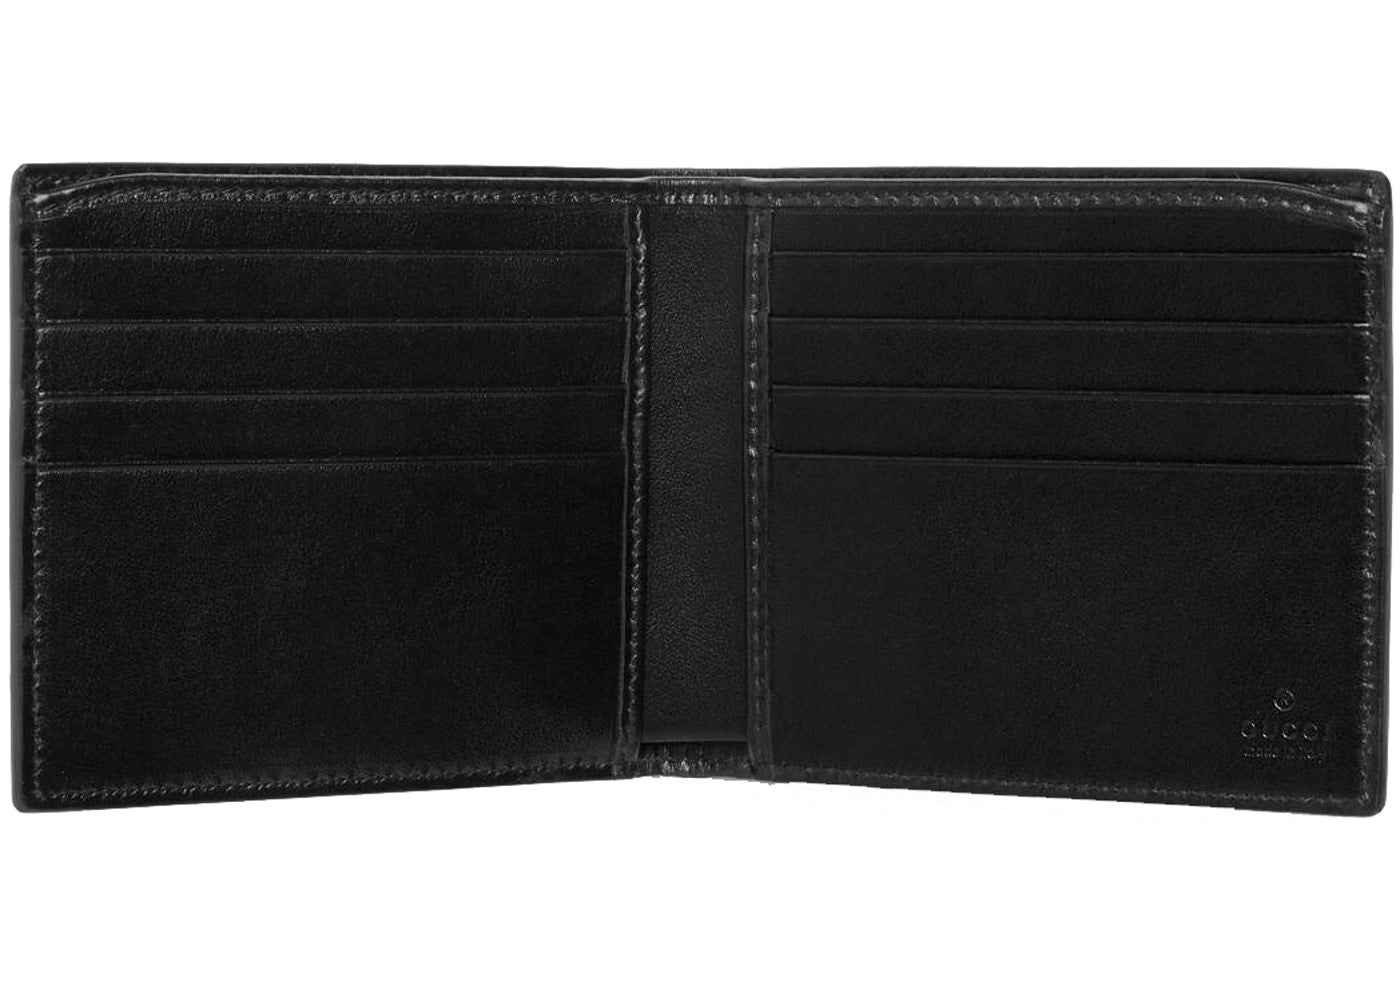 Leather Wallet with Gucci Logo (8 Card Slot) Black